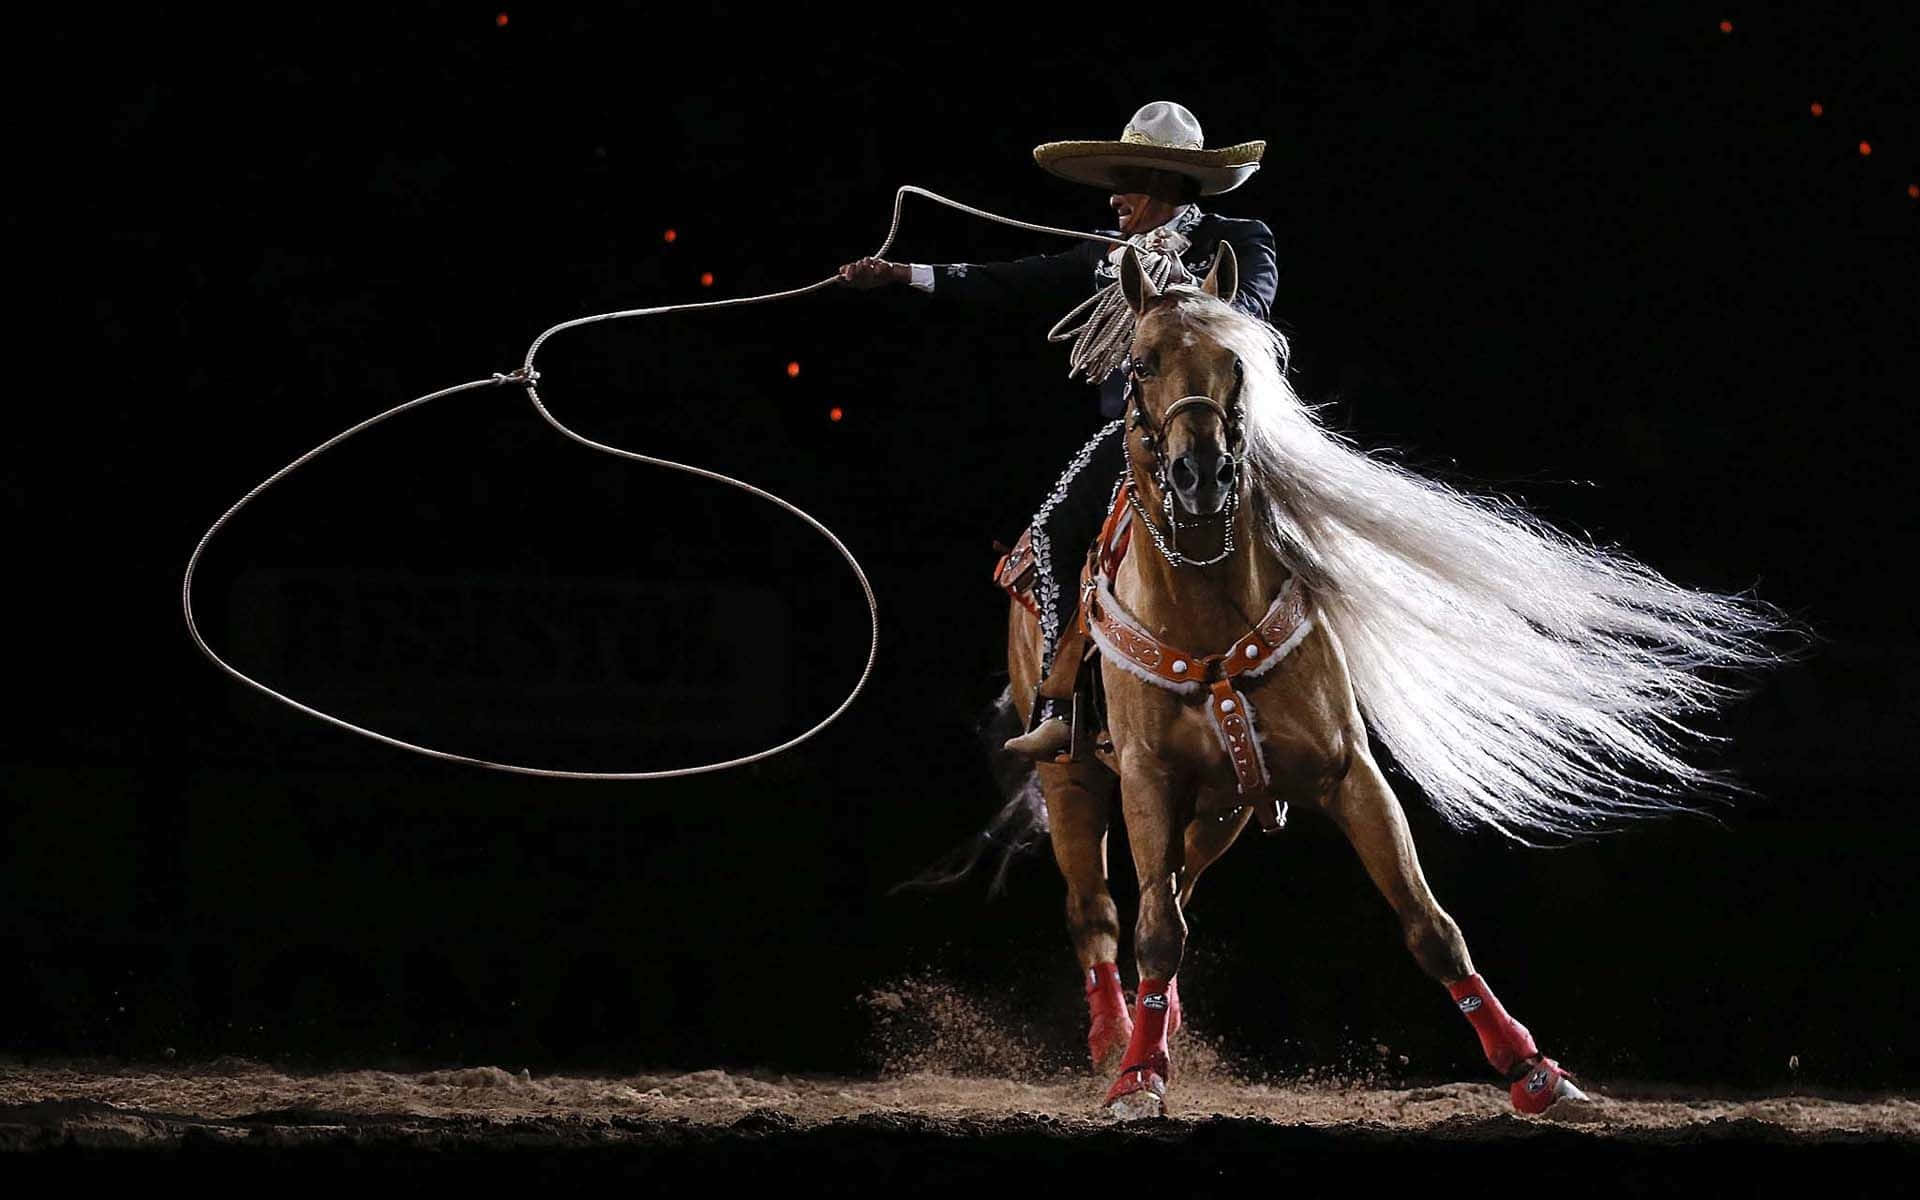 A Cowboy Competing in a Rodeo Event